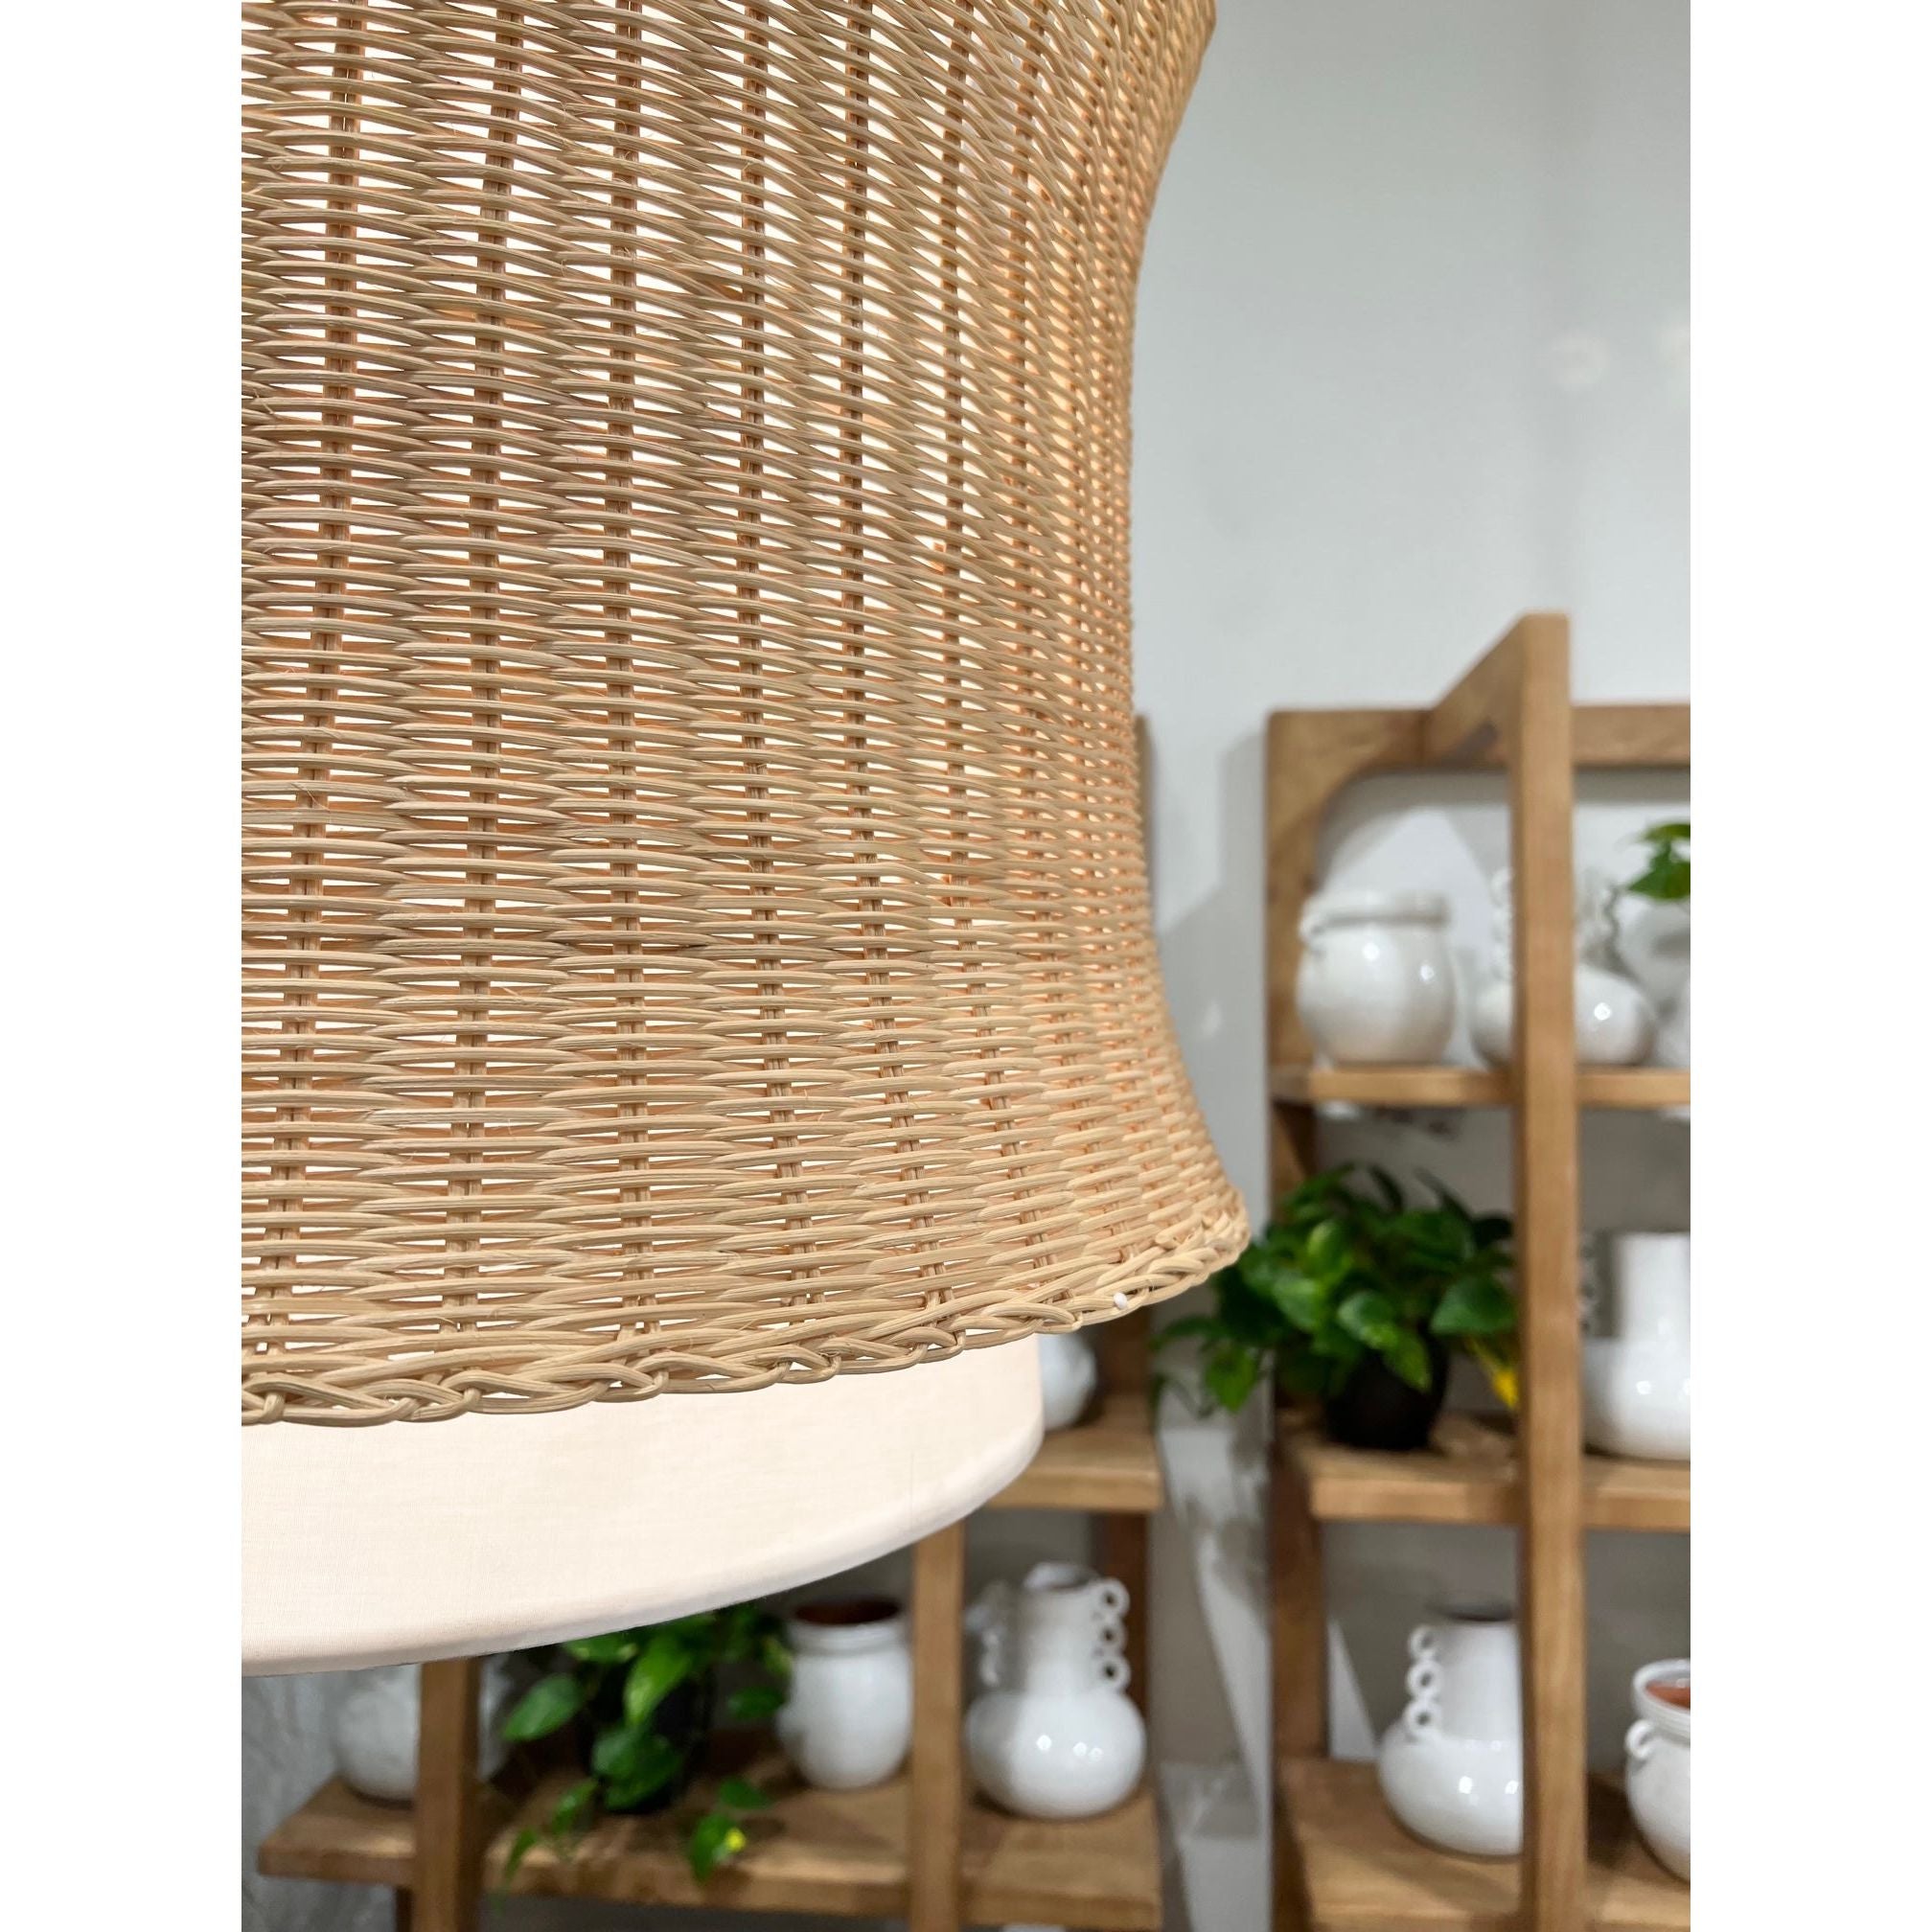 Made of fabric and beautifully natural woven rattan, the Chrisley Pendant Light is a wonderfully modern and airy fixture to hang above your kitchen island or bedroom nightstands. Amethyst Home provides interior design services, furniture, rugs, and lighting in the Houston metro area.